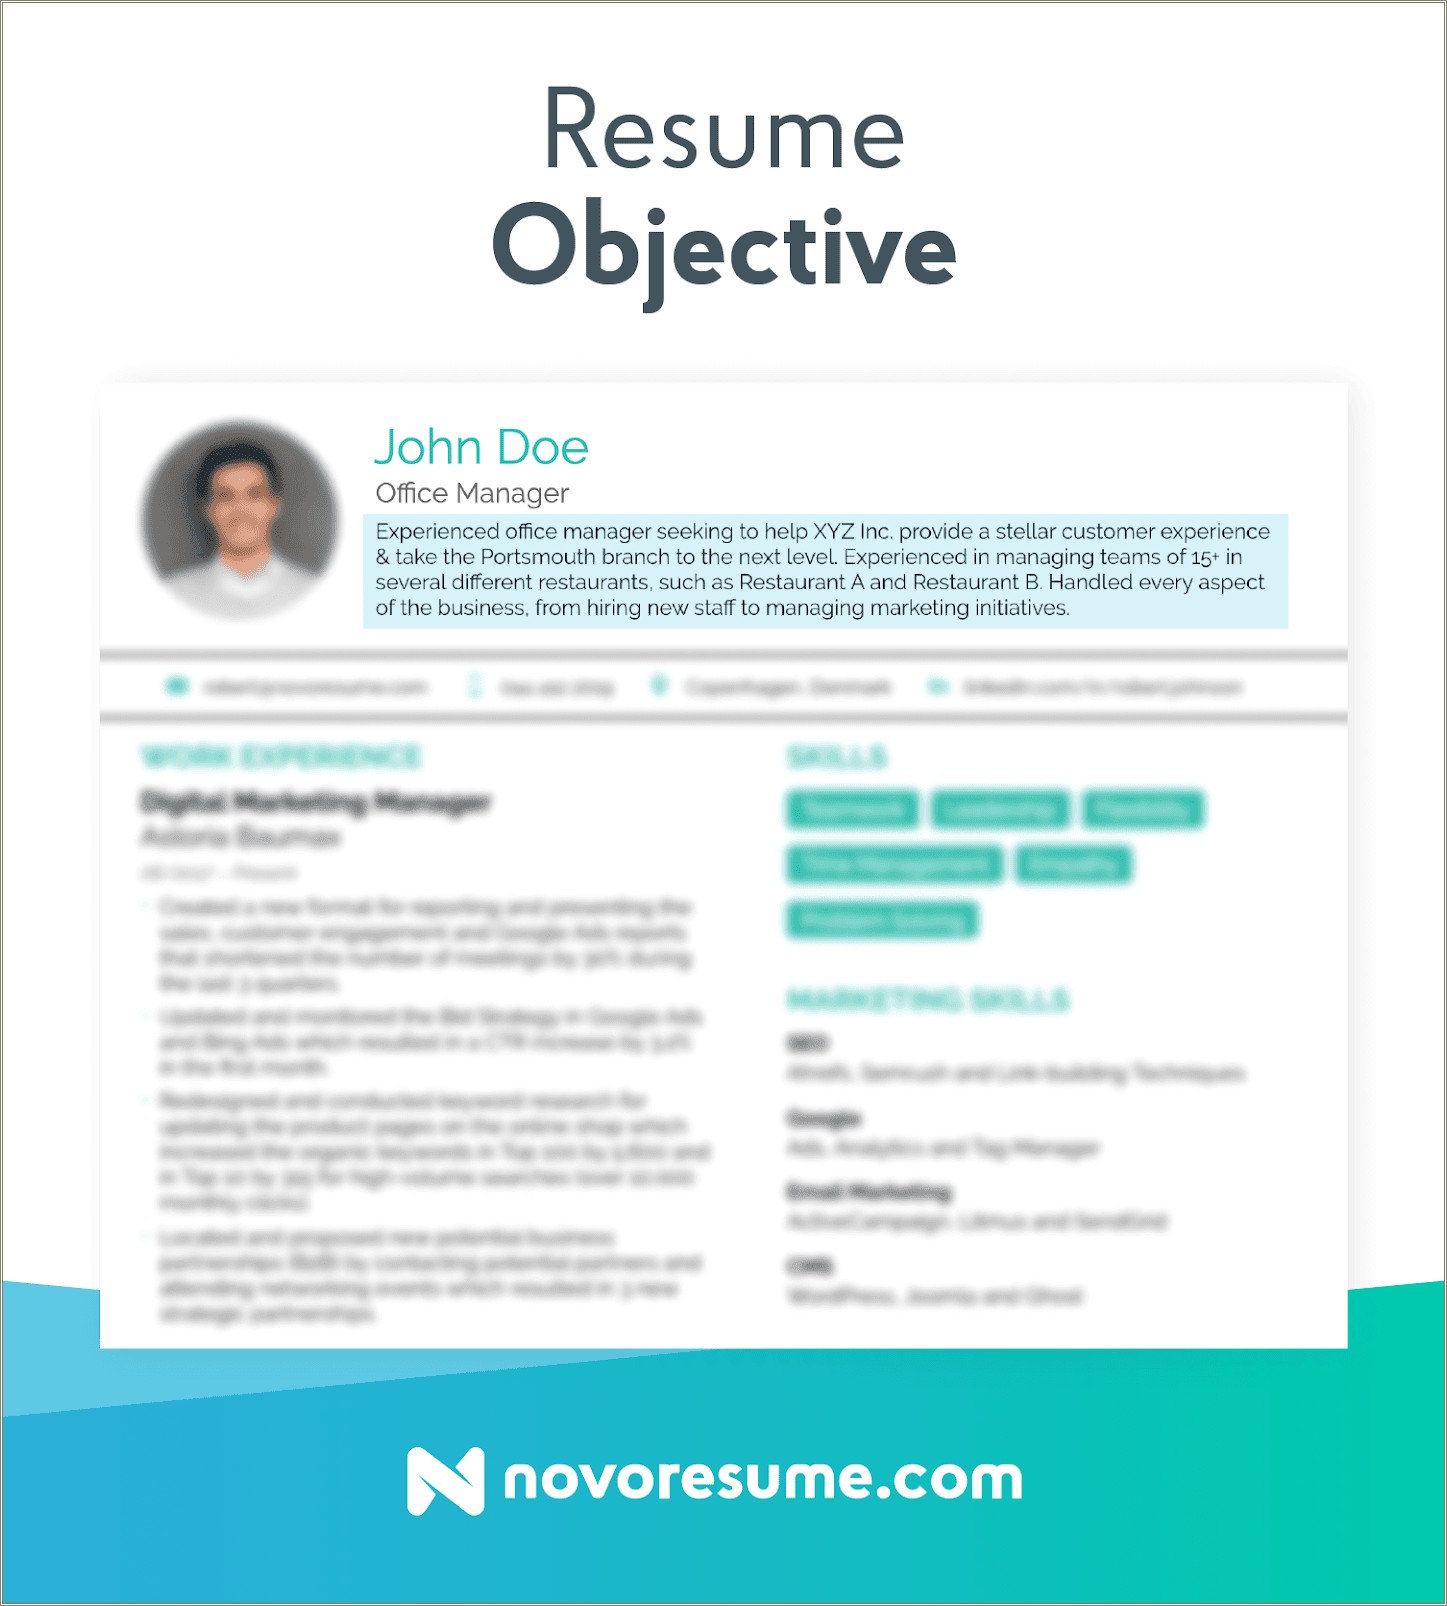 Examples Of Job Goals On Resume